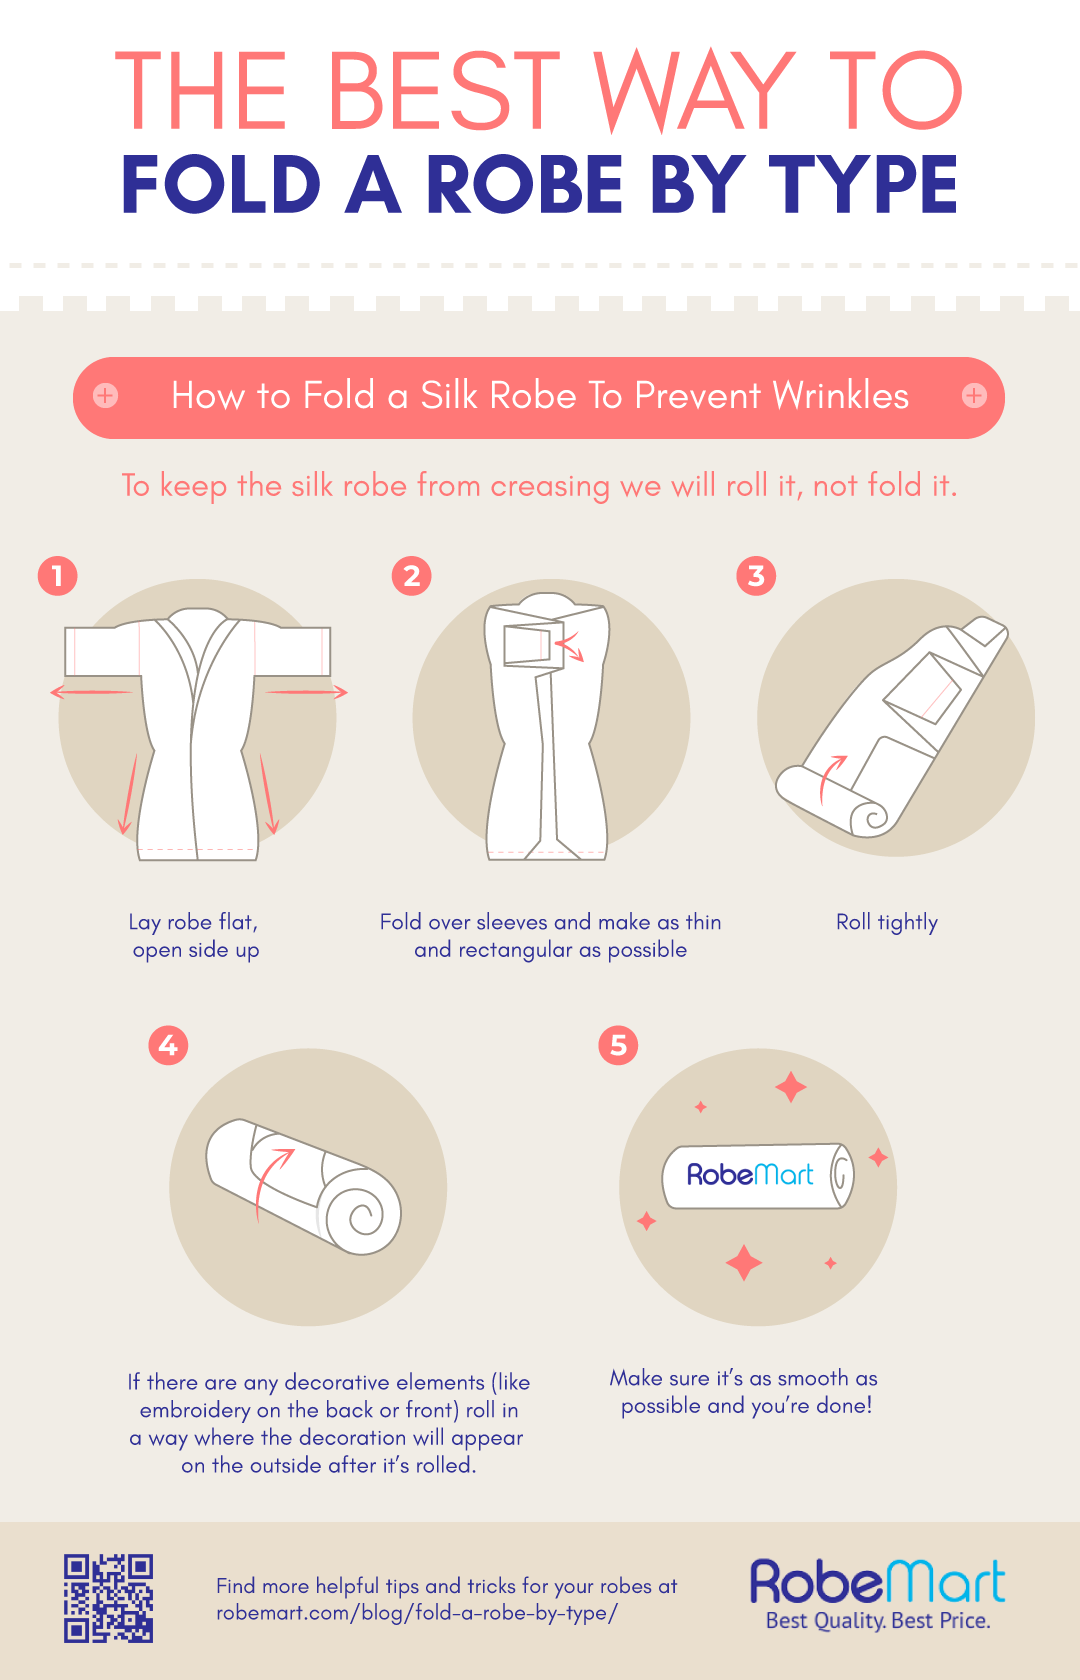 How to Fold a Silk Robe: To keep the silk robe from creasing we will roll it, not fold it. 1. Lay robe flat, open side up. 2. Fold over the sleeves and make as thin and rectangular as possible. 3. Roll tightly. 4. If there are any decorative elements (like embroidery on the back or front) try to roll in a way where the decoration will appear on the outside after it’s rolled. 5. Make sure it’s as smooth as possible and you’re done! | Infographic https://robemart.com/blog/fold-a-robe-by-type/